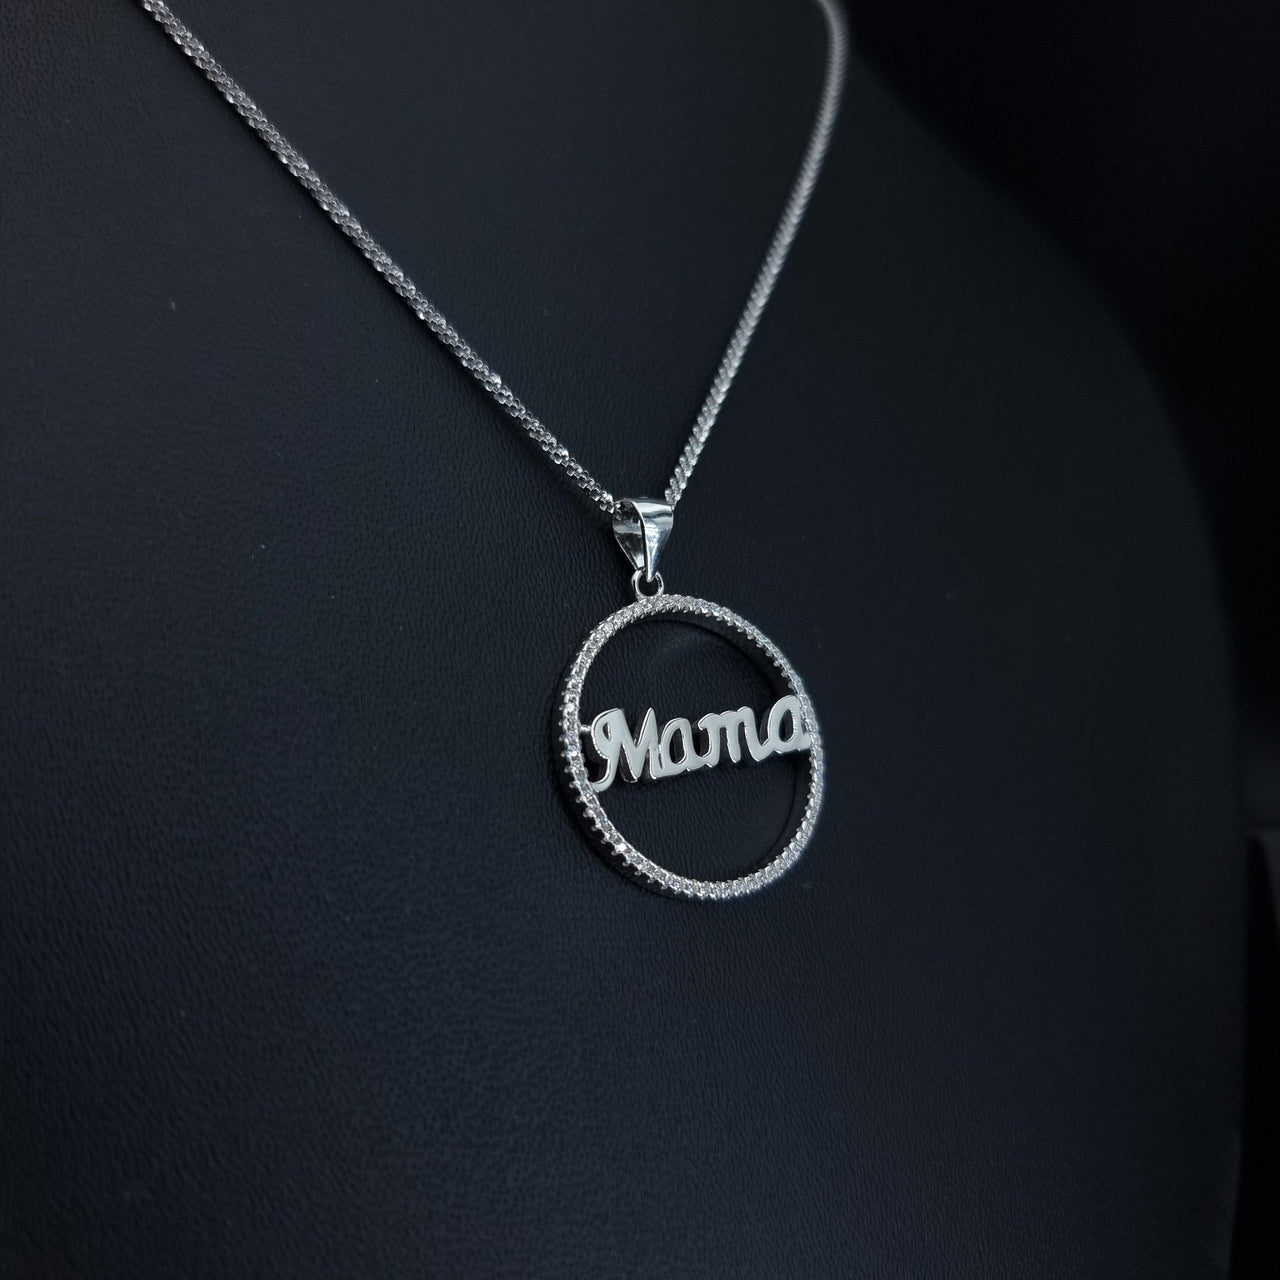 "Mama" Clear Stones Necklace